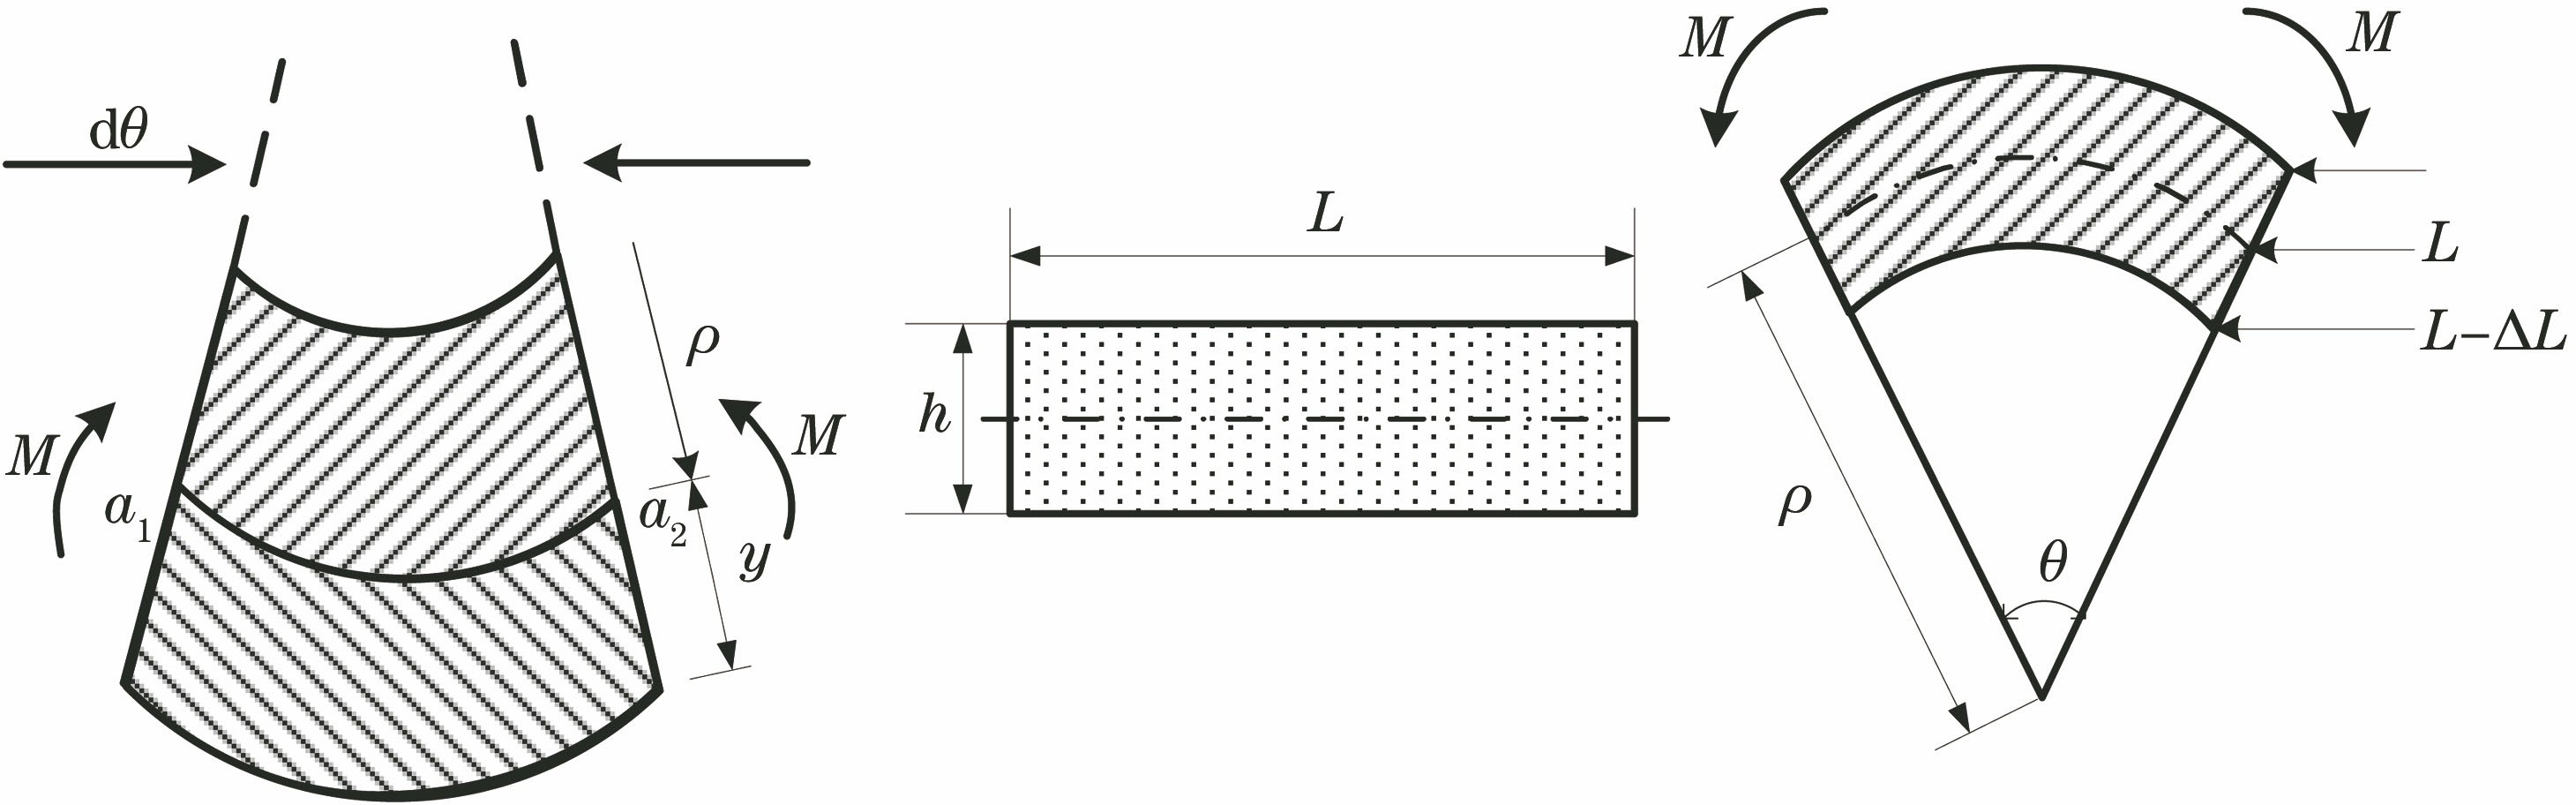 Schematic diagram of the deformation of the micro-element structure